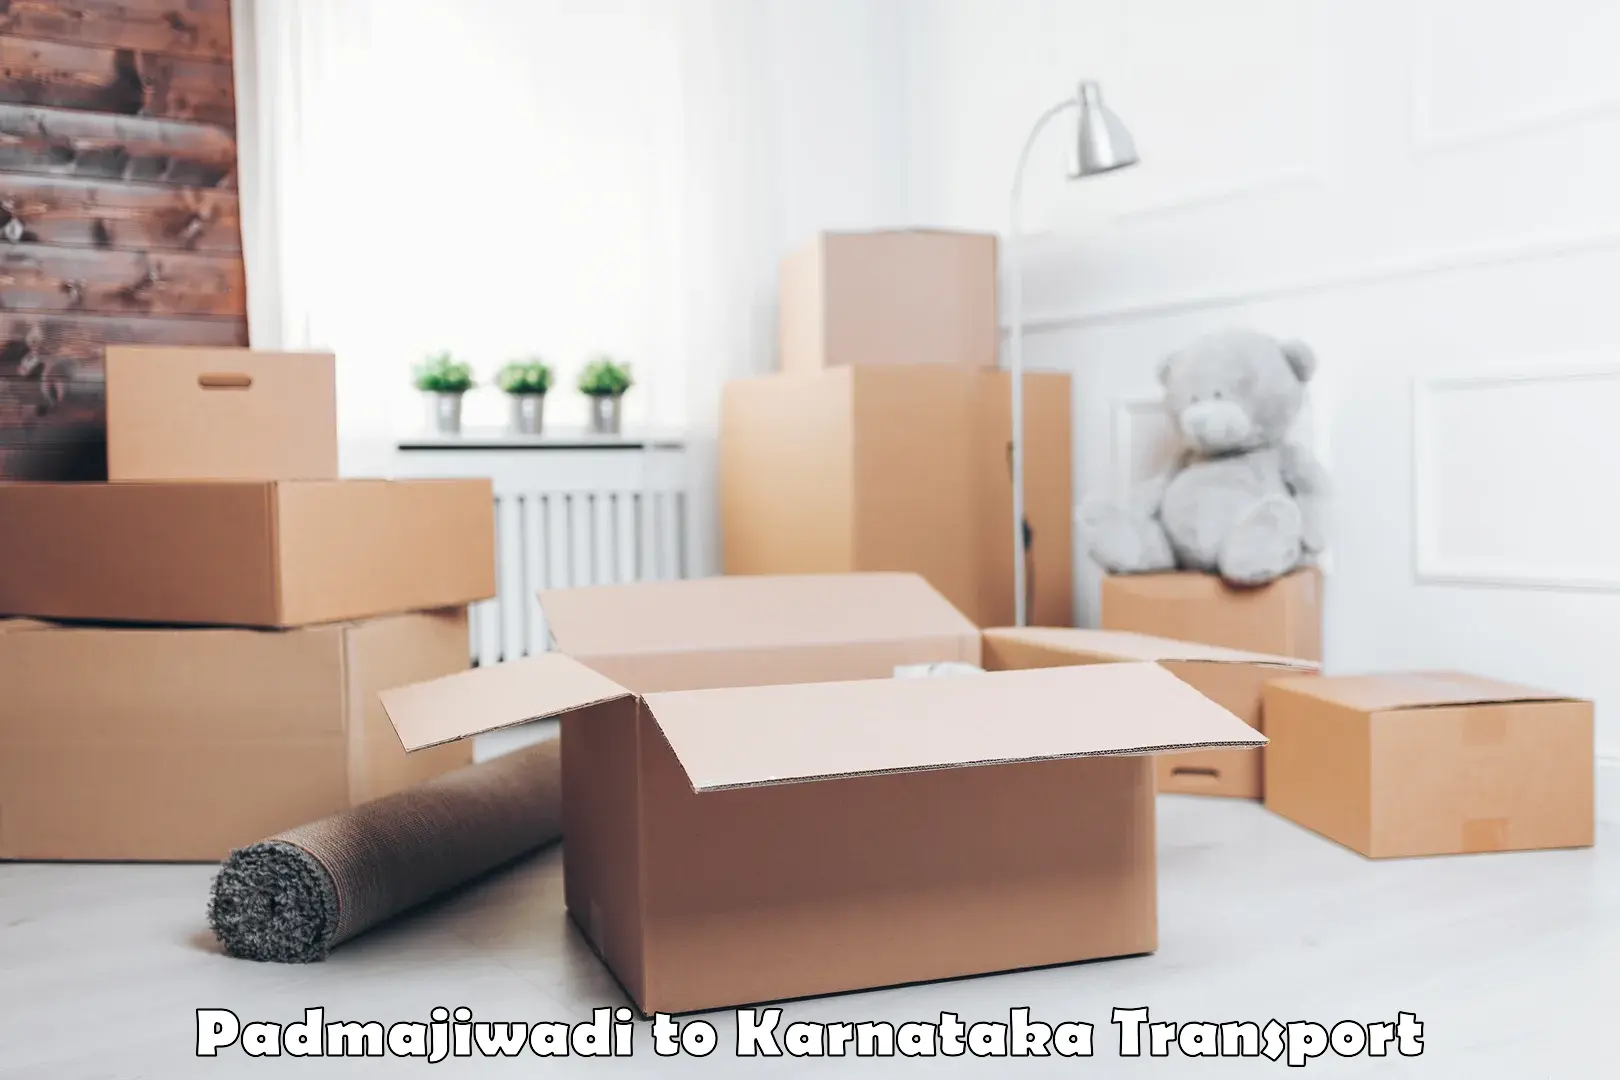 Package delivery services in Padmajiwadi to Bellary